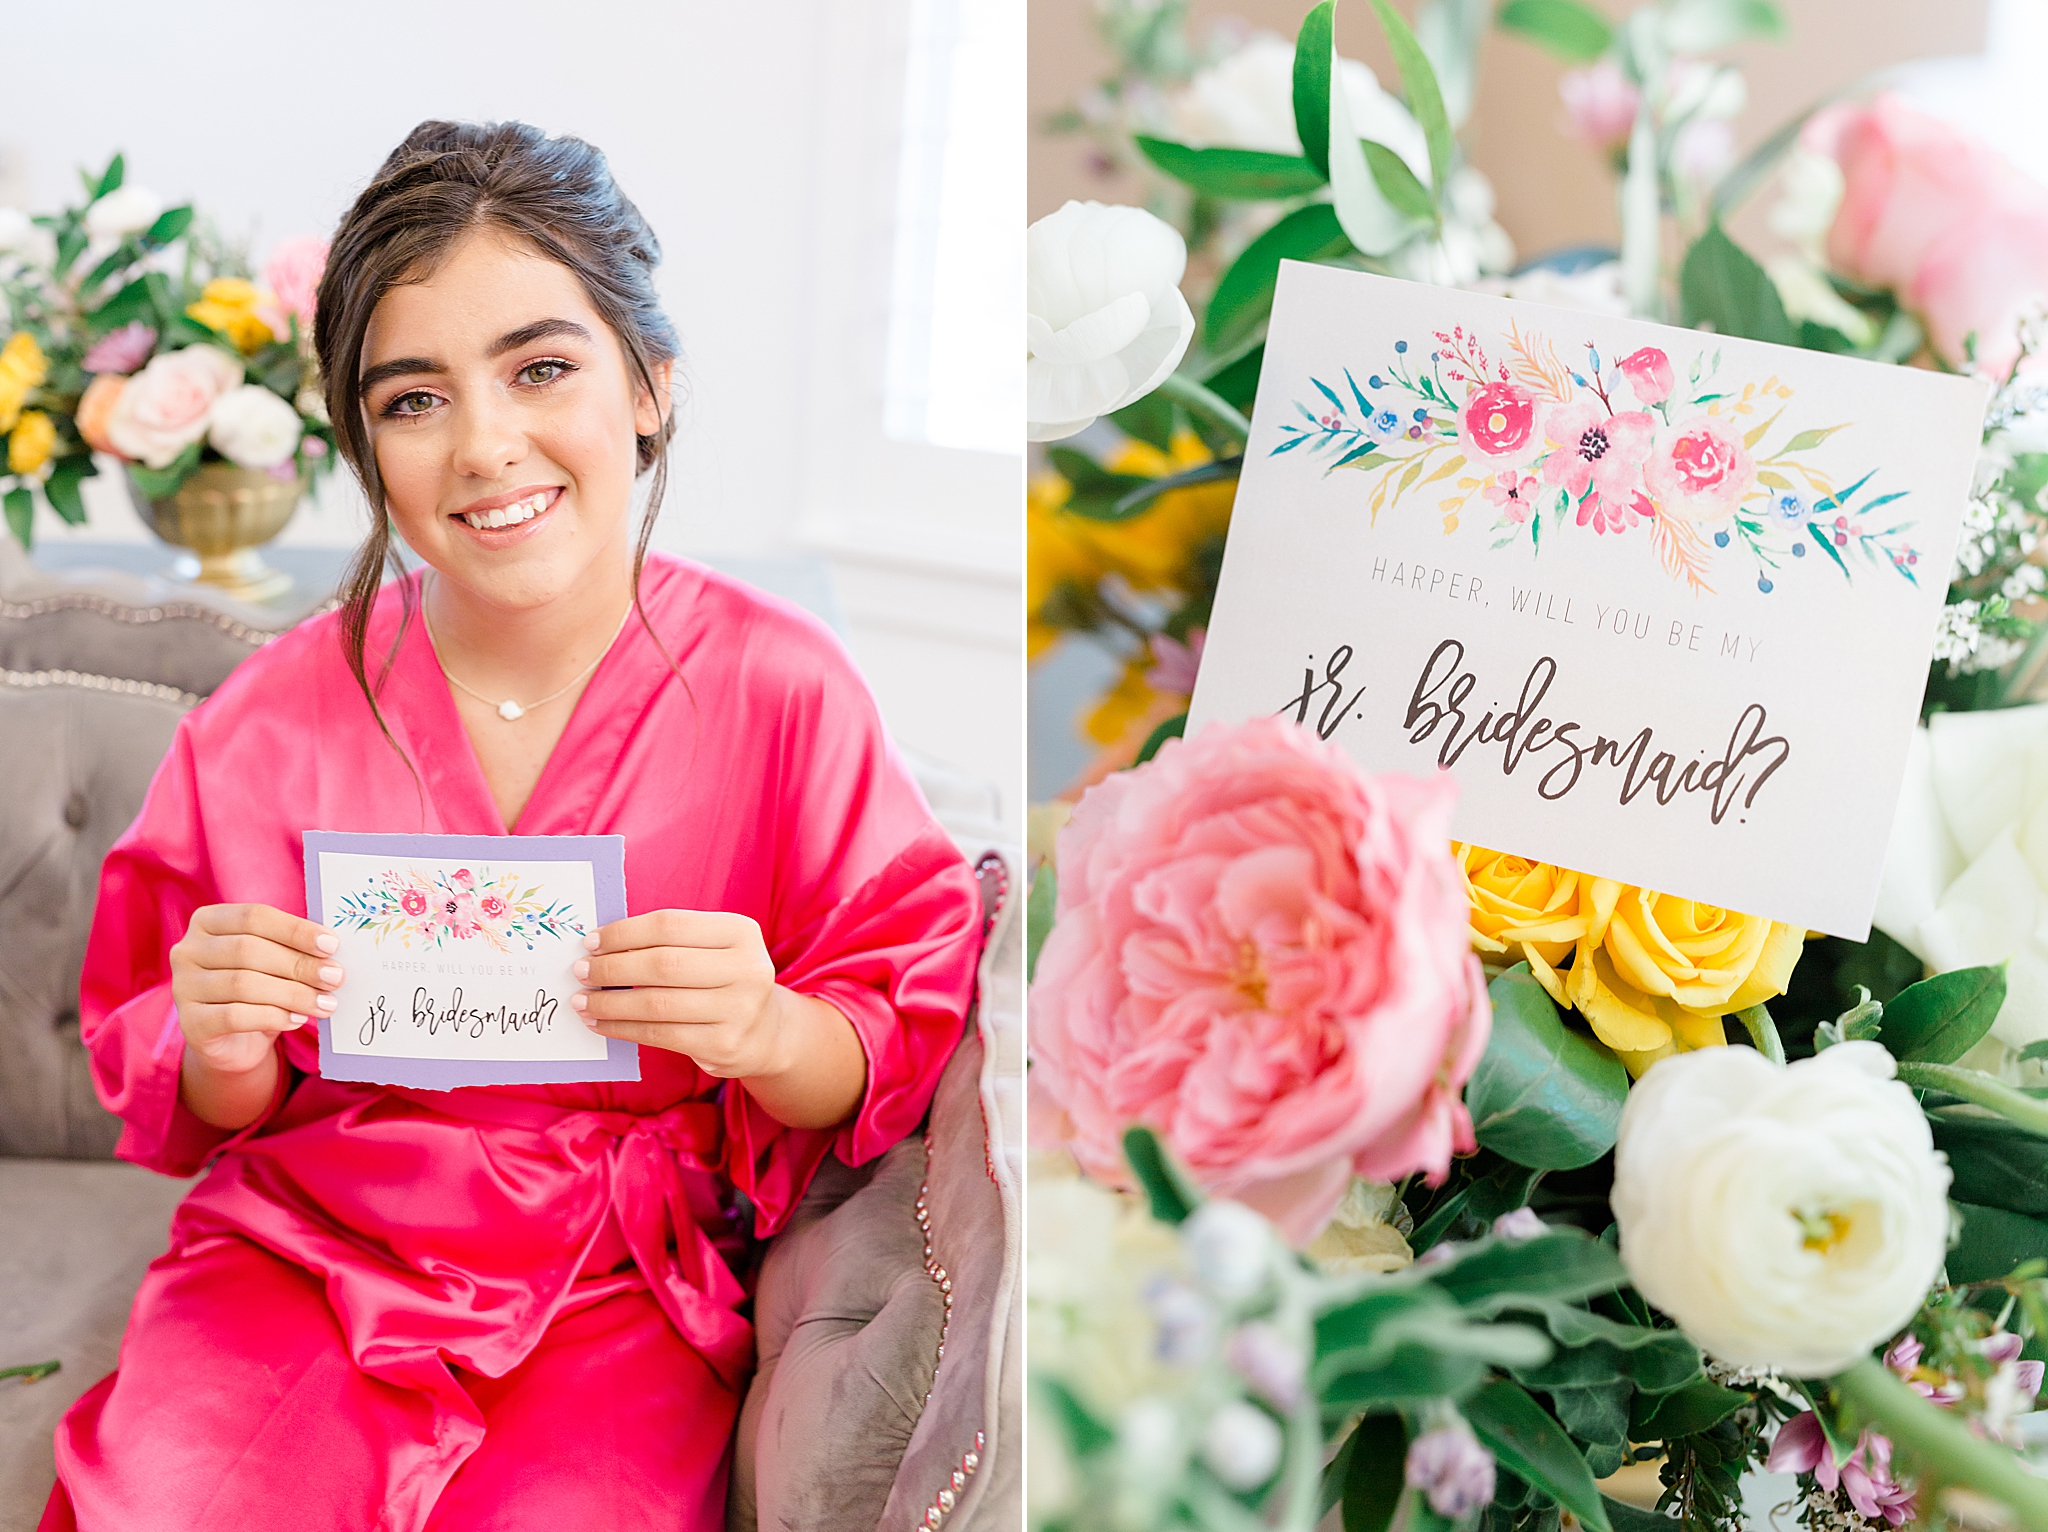 Jr. bridesmaid in pink robe holds card asking to be in wedding